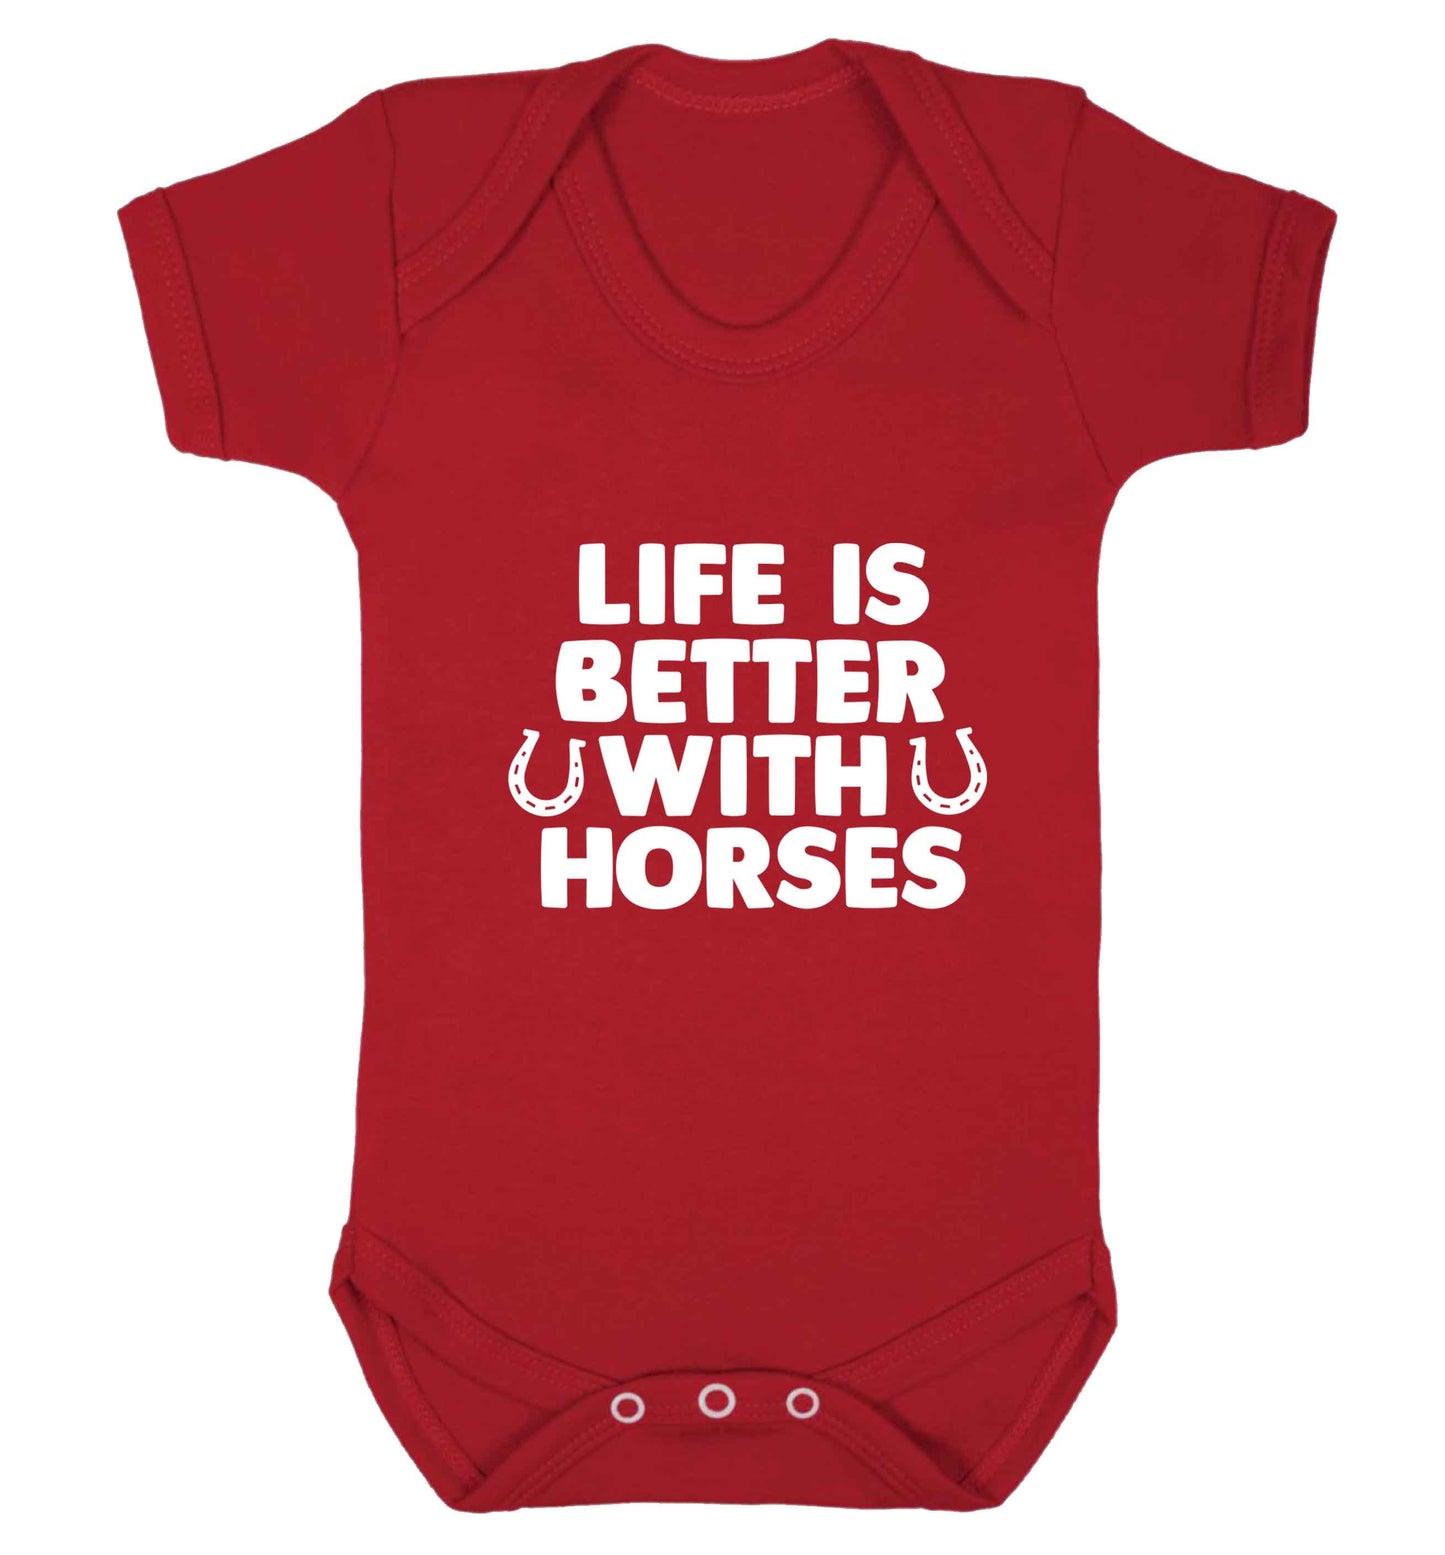 Life is better with horses baby vest red 18-24 months